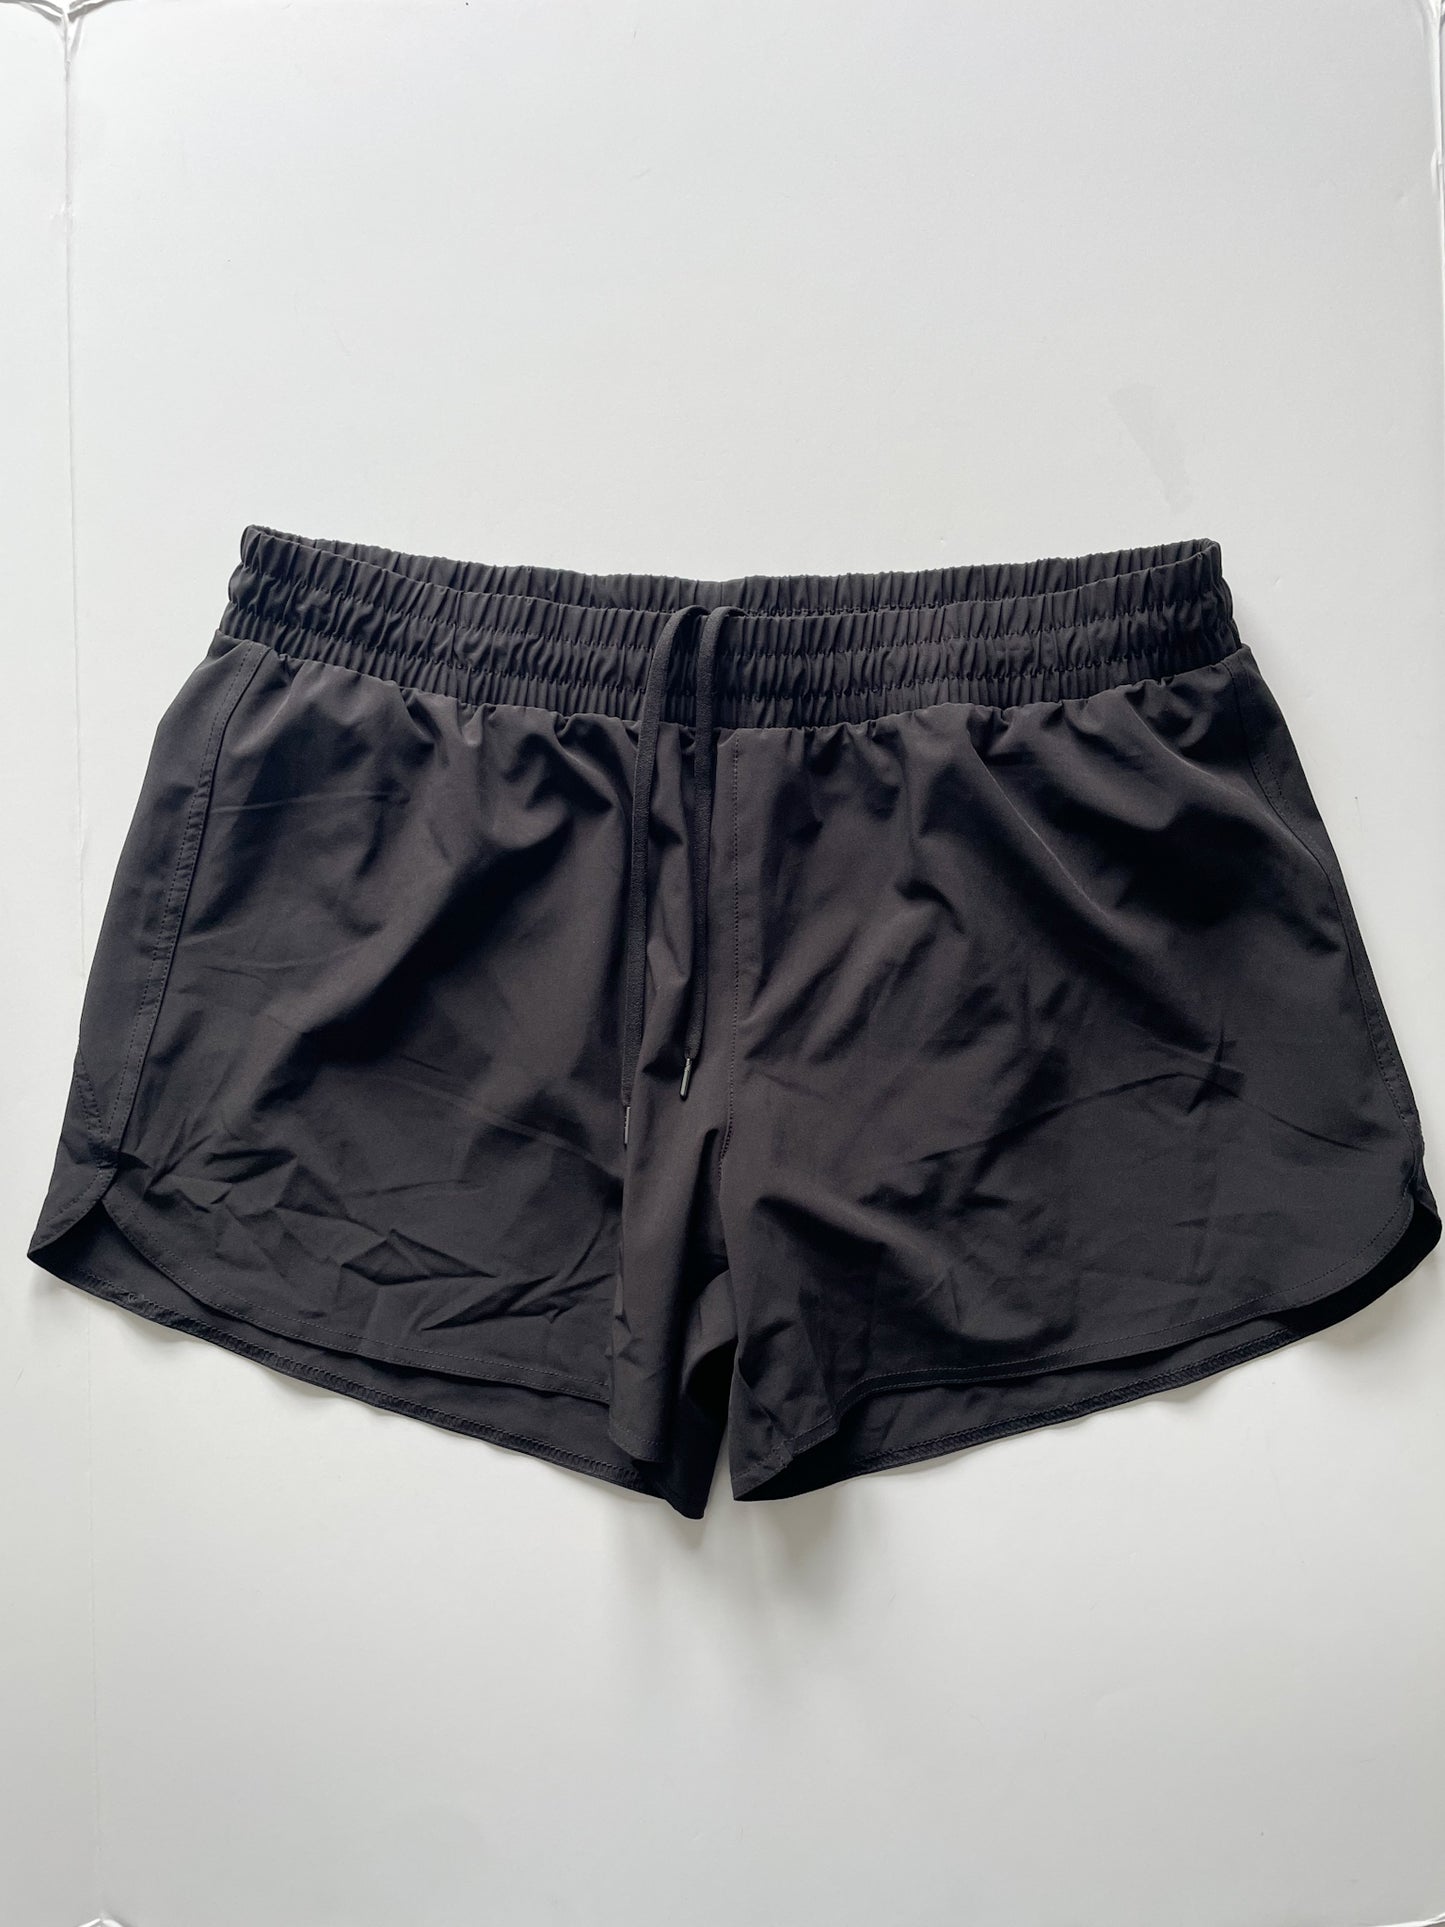 Athletic Works Black High Rise Workout Running Shorts - XL